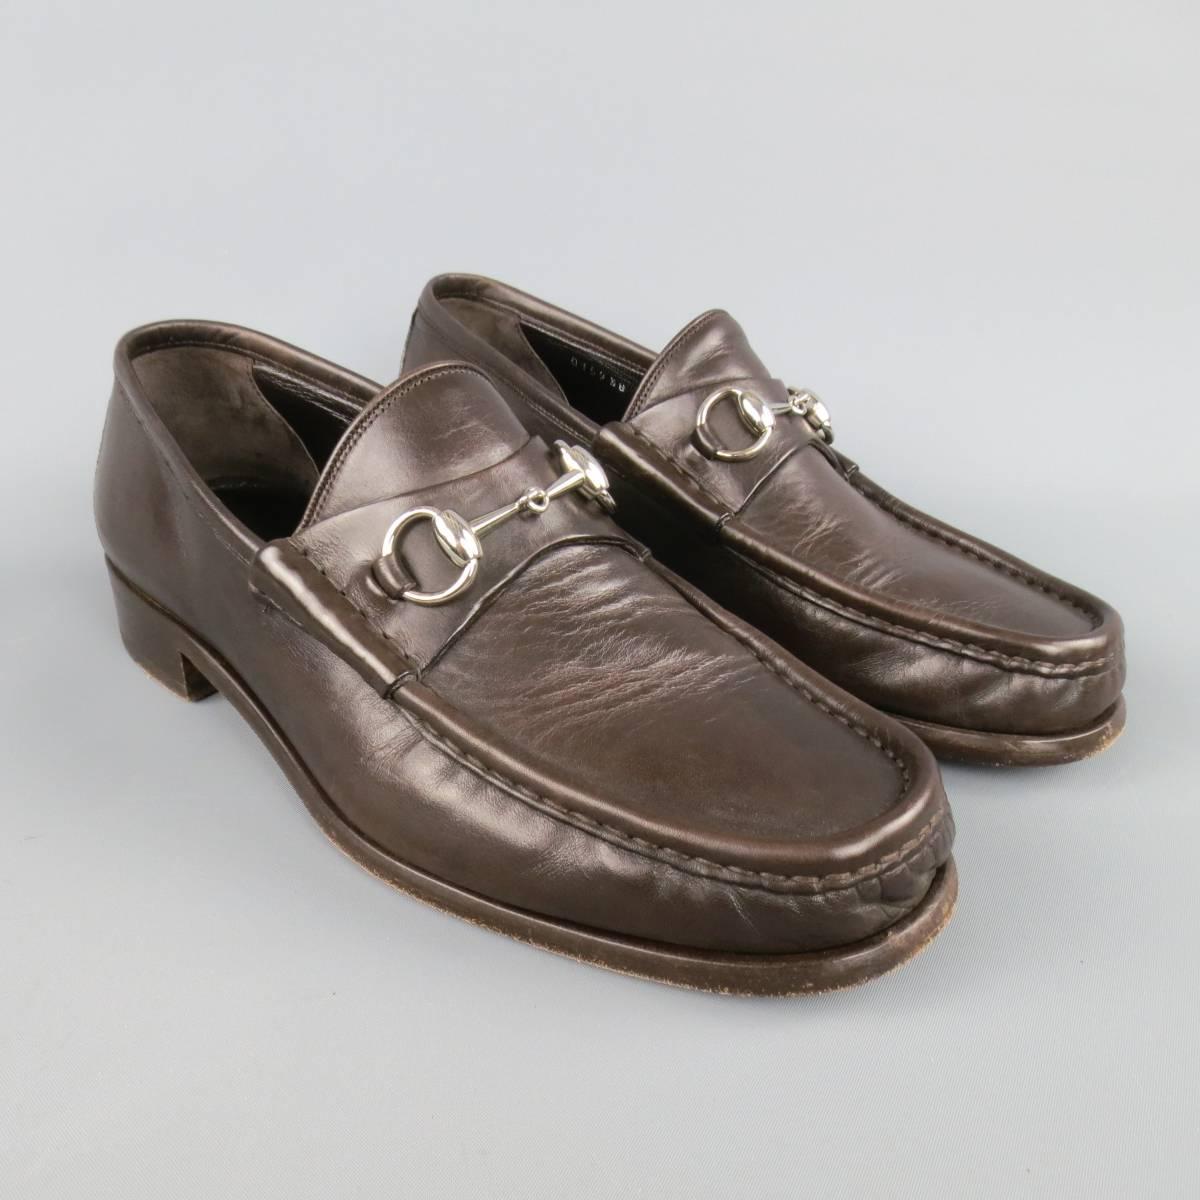 Classic GUCCI loafers in a rich chocolate brown smooth leather featuring a top stitch toe, silver tone brass horsebit detail and monochromatic sole. Made in Italy.
 
Excellent Pre-Owned Condition.
Marked: 8.5
 
Outsole: 11 x 3.75 in.